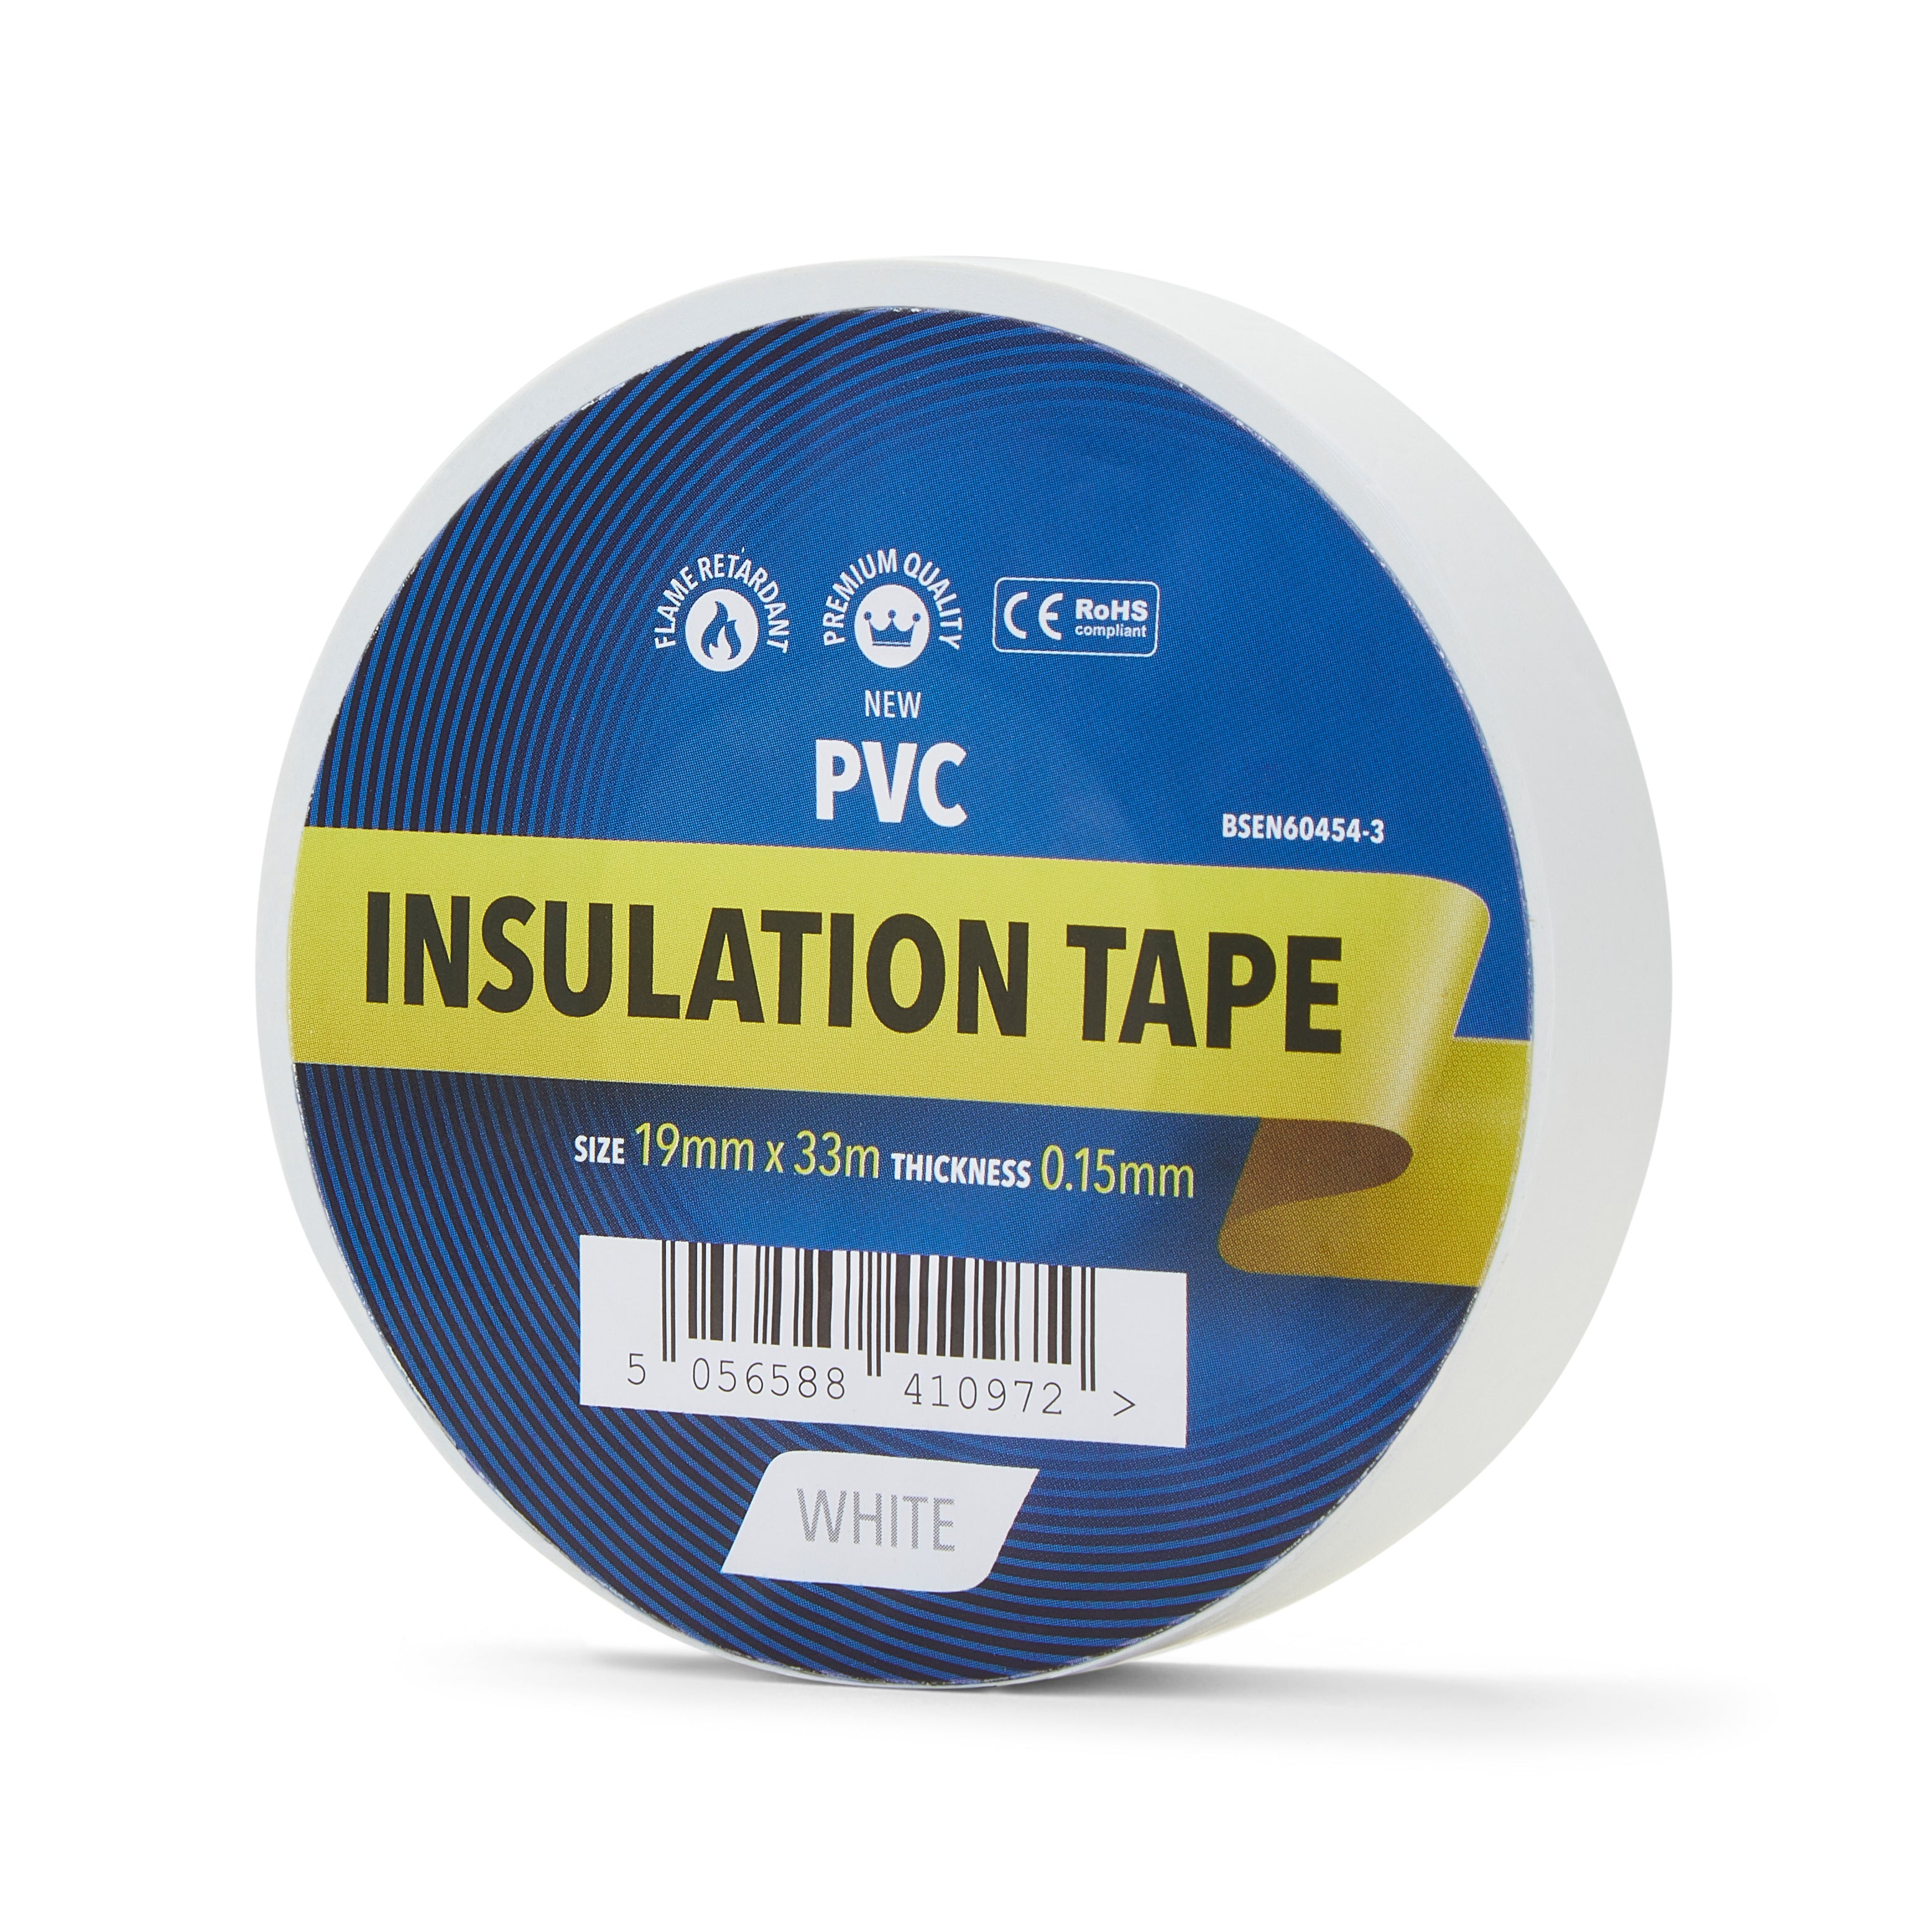 White Electrical Tape 19mm - PVC Insulation Tape